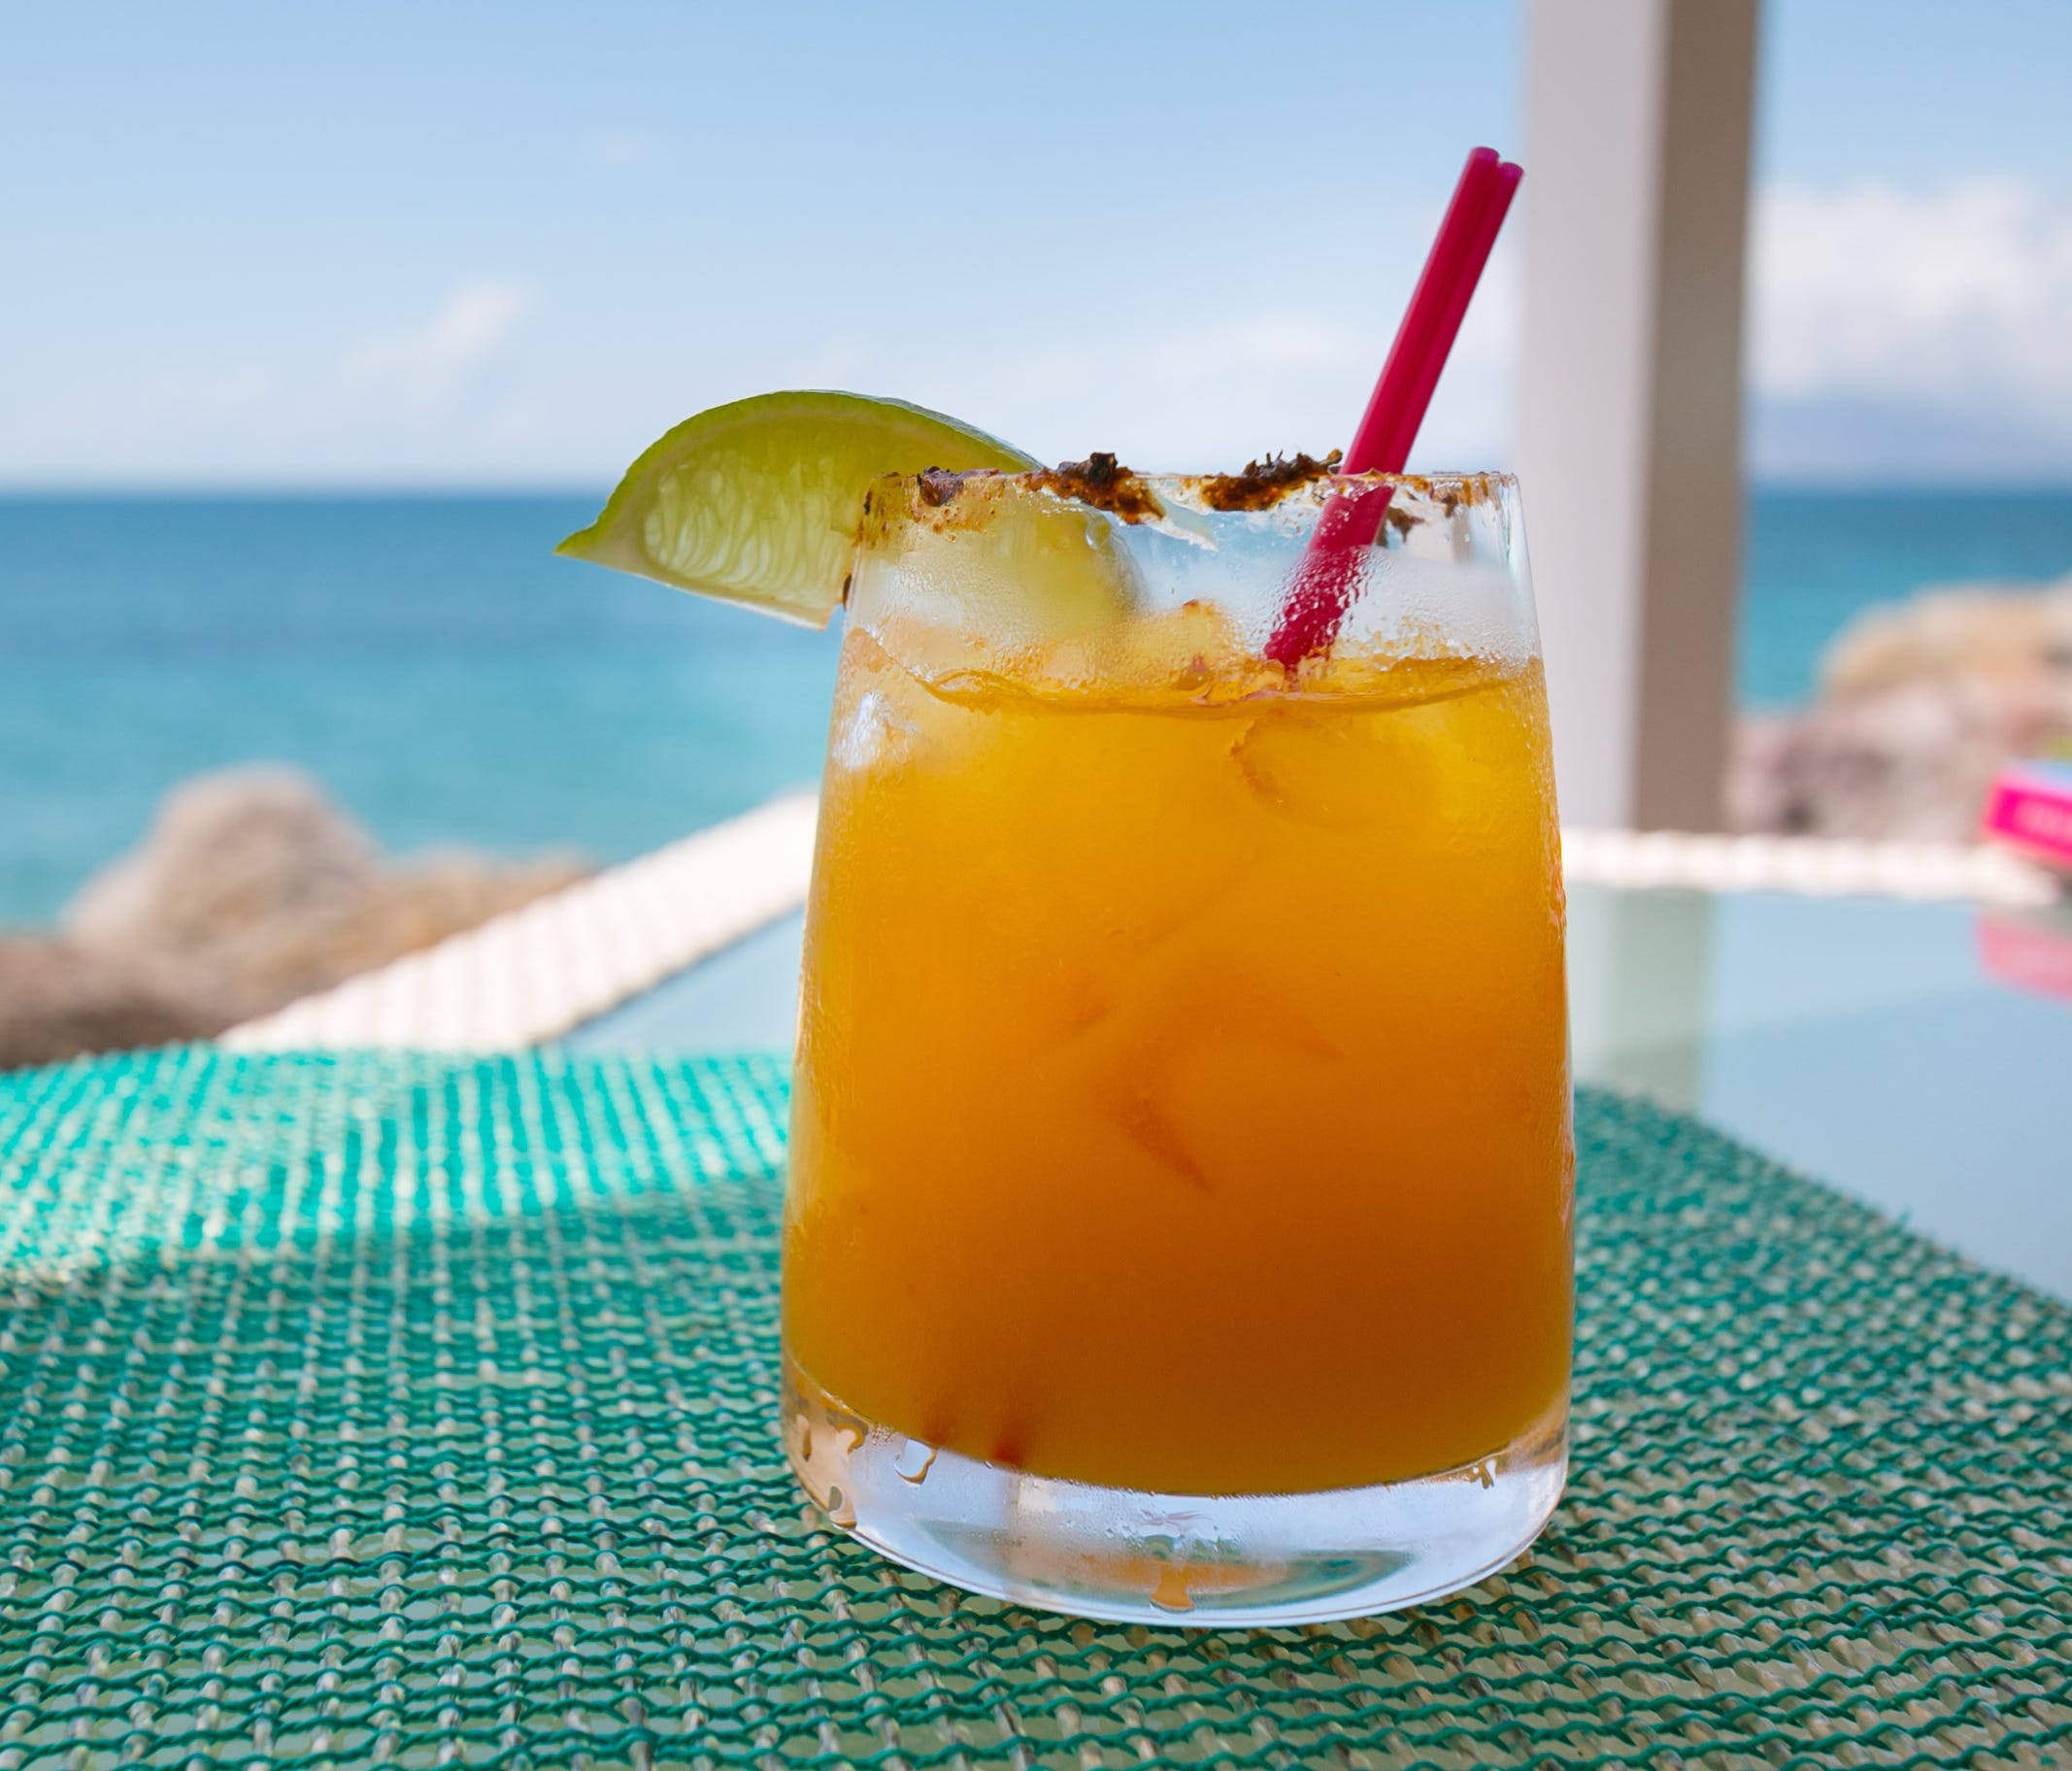 Or try the Mango Mary, a tropical twist on a bloody, rimmed in jerk seasoning. For dinner, book the five-course food and rum pairing for proof the popular liquor can match an array of foods, from sticky, sweet ribs to pineapple dessert.